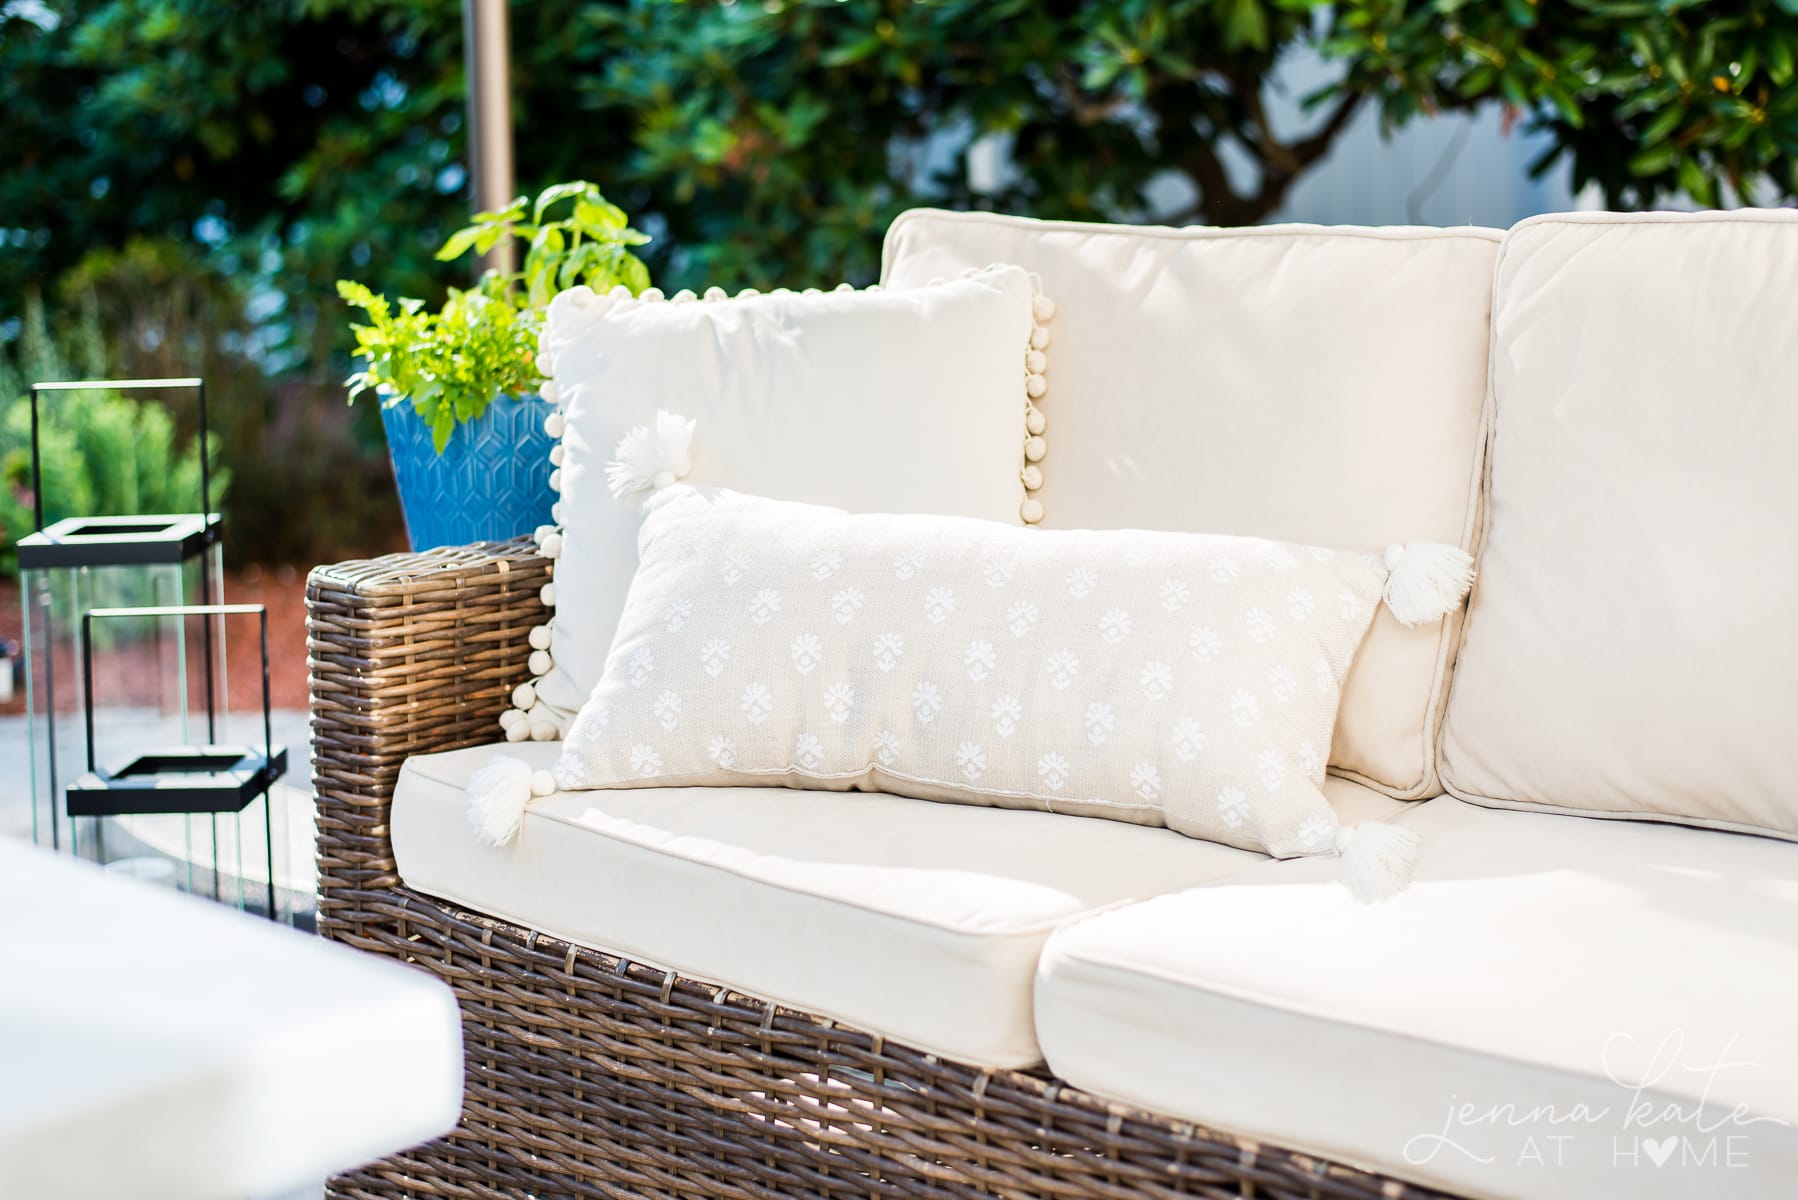 The quick and easy way to clean outdoor patio cushions using a few basic household supplies 